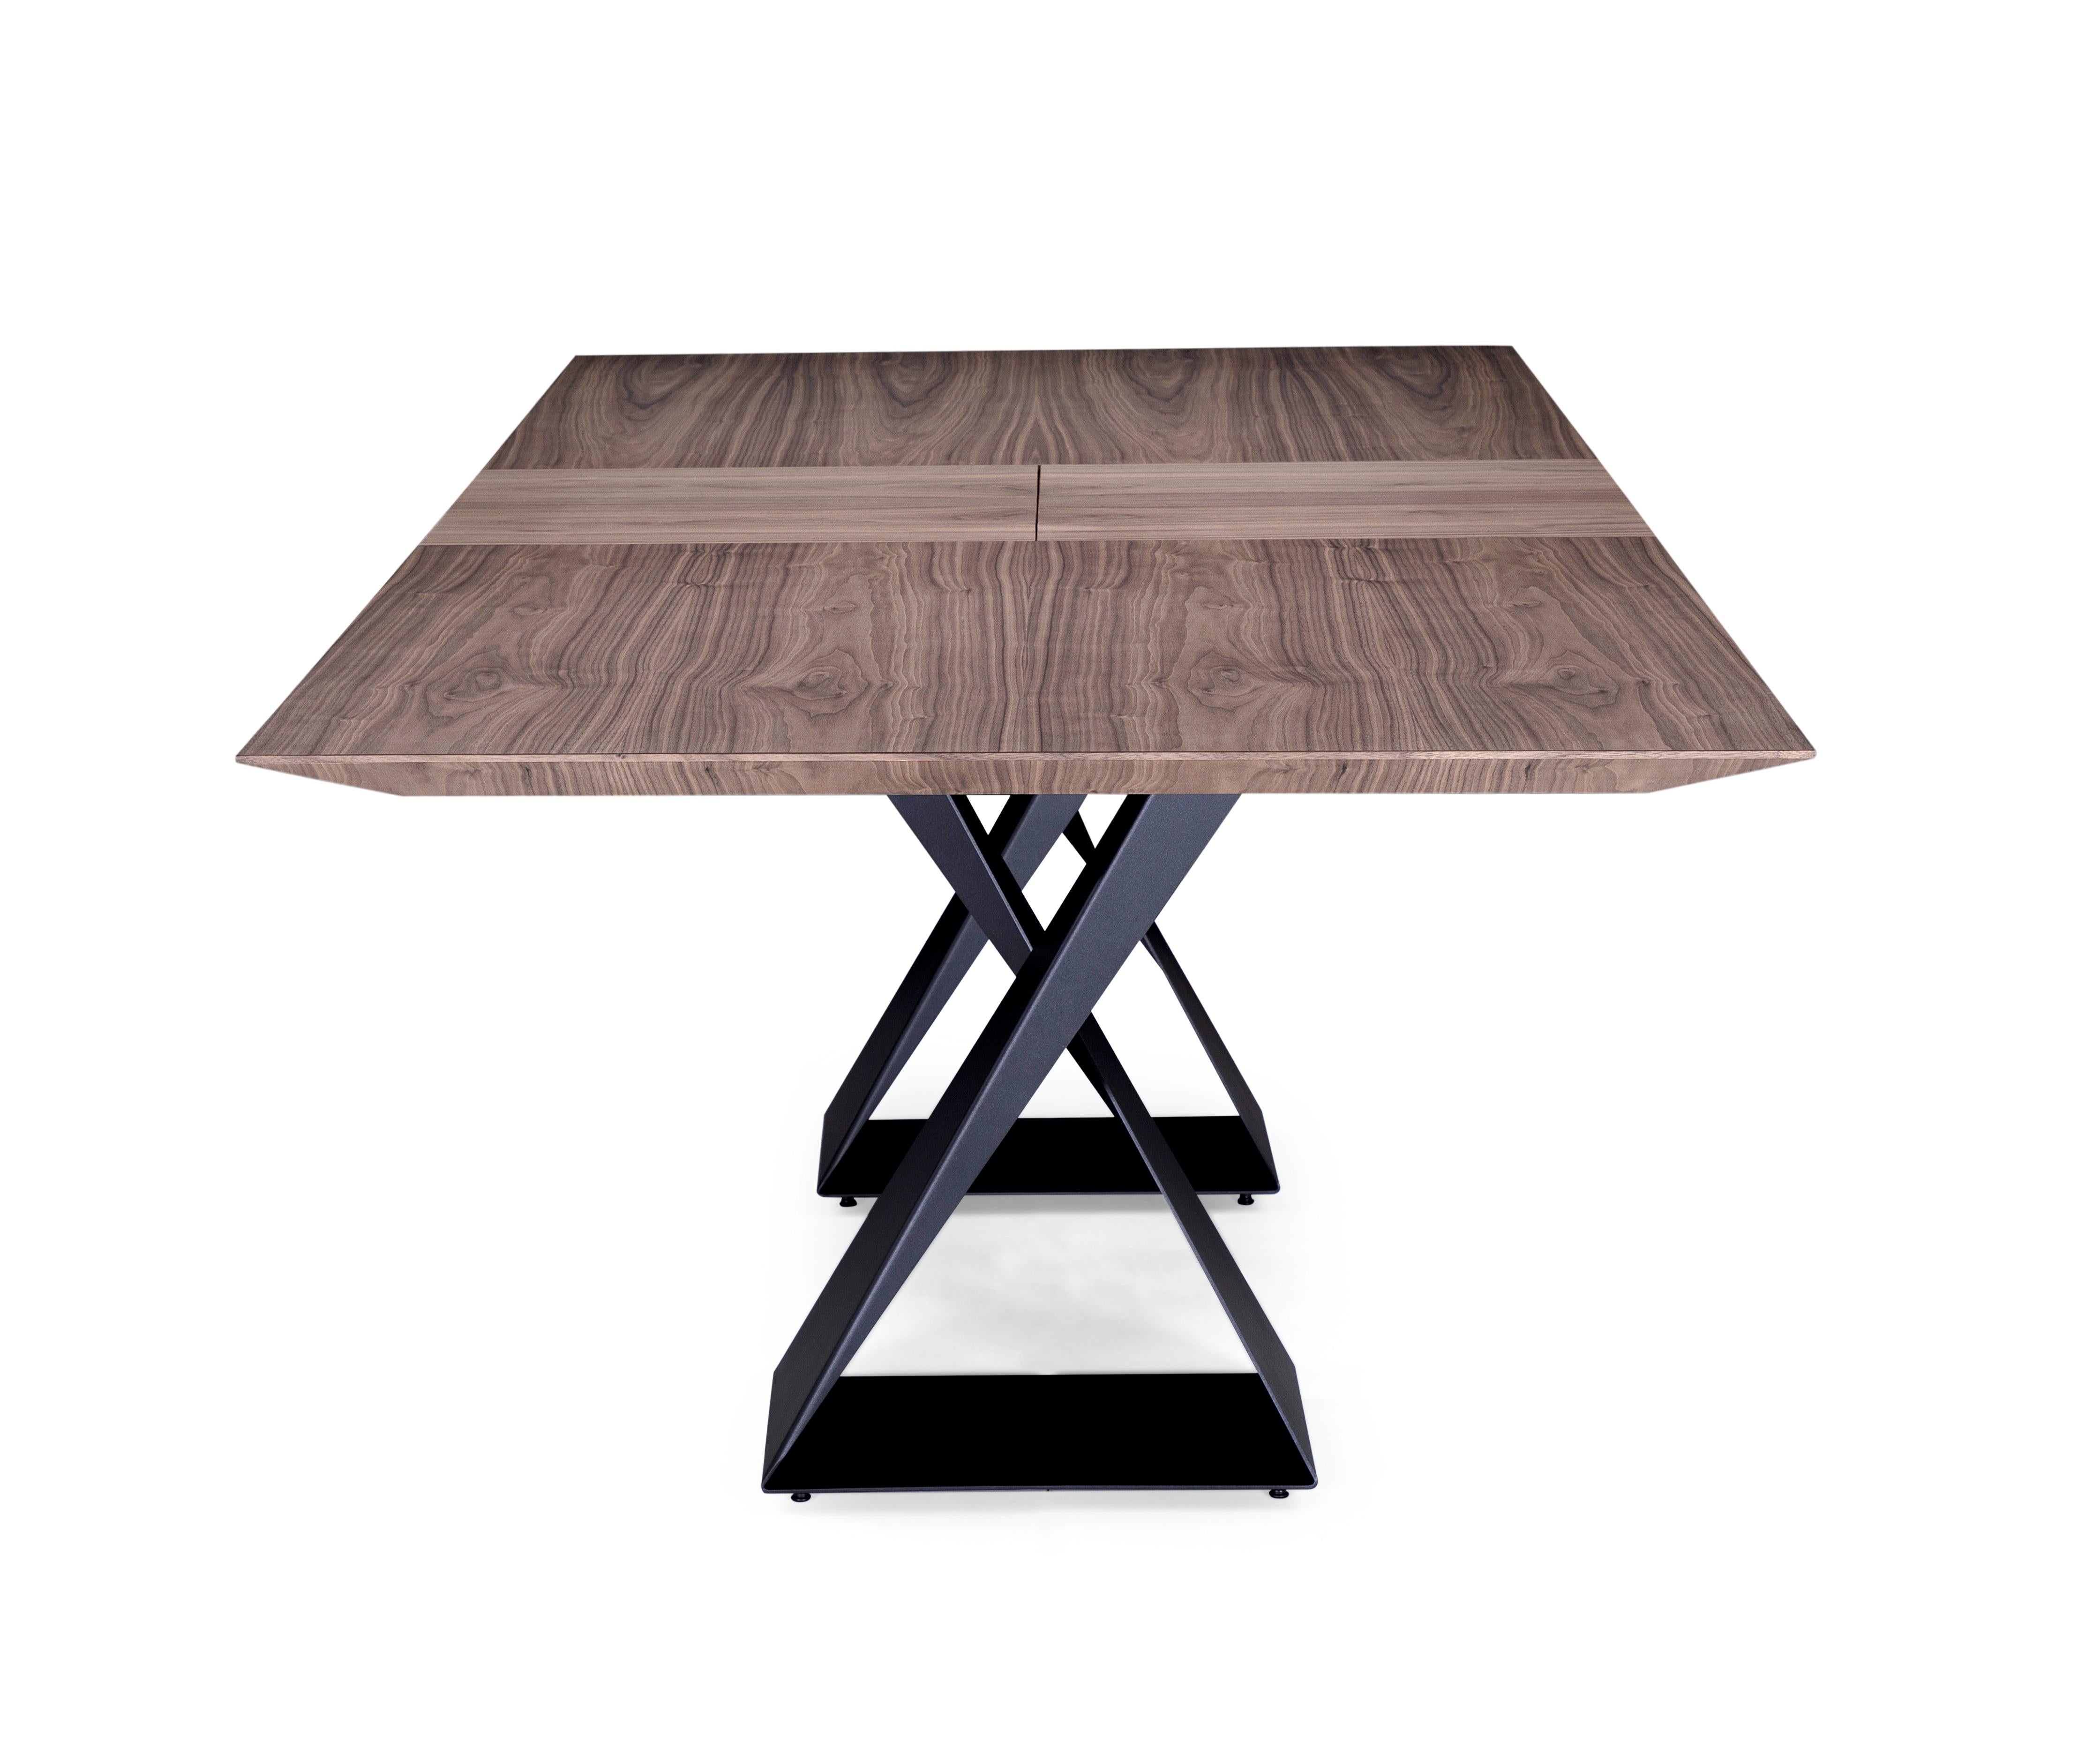 Brazilian Cronos Extendable Dining Table with a Walnut Wood Finish Top and Metal Legs 79'' For Sale